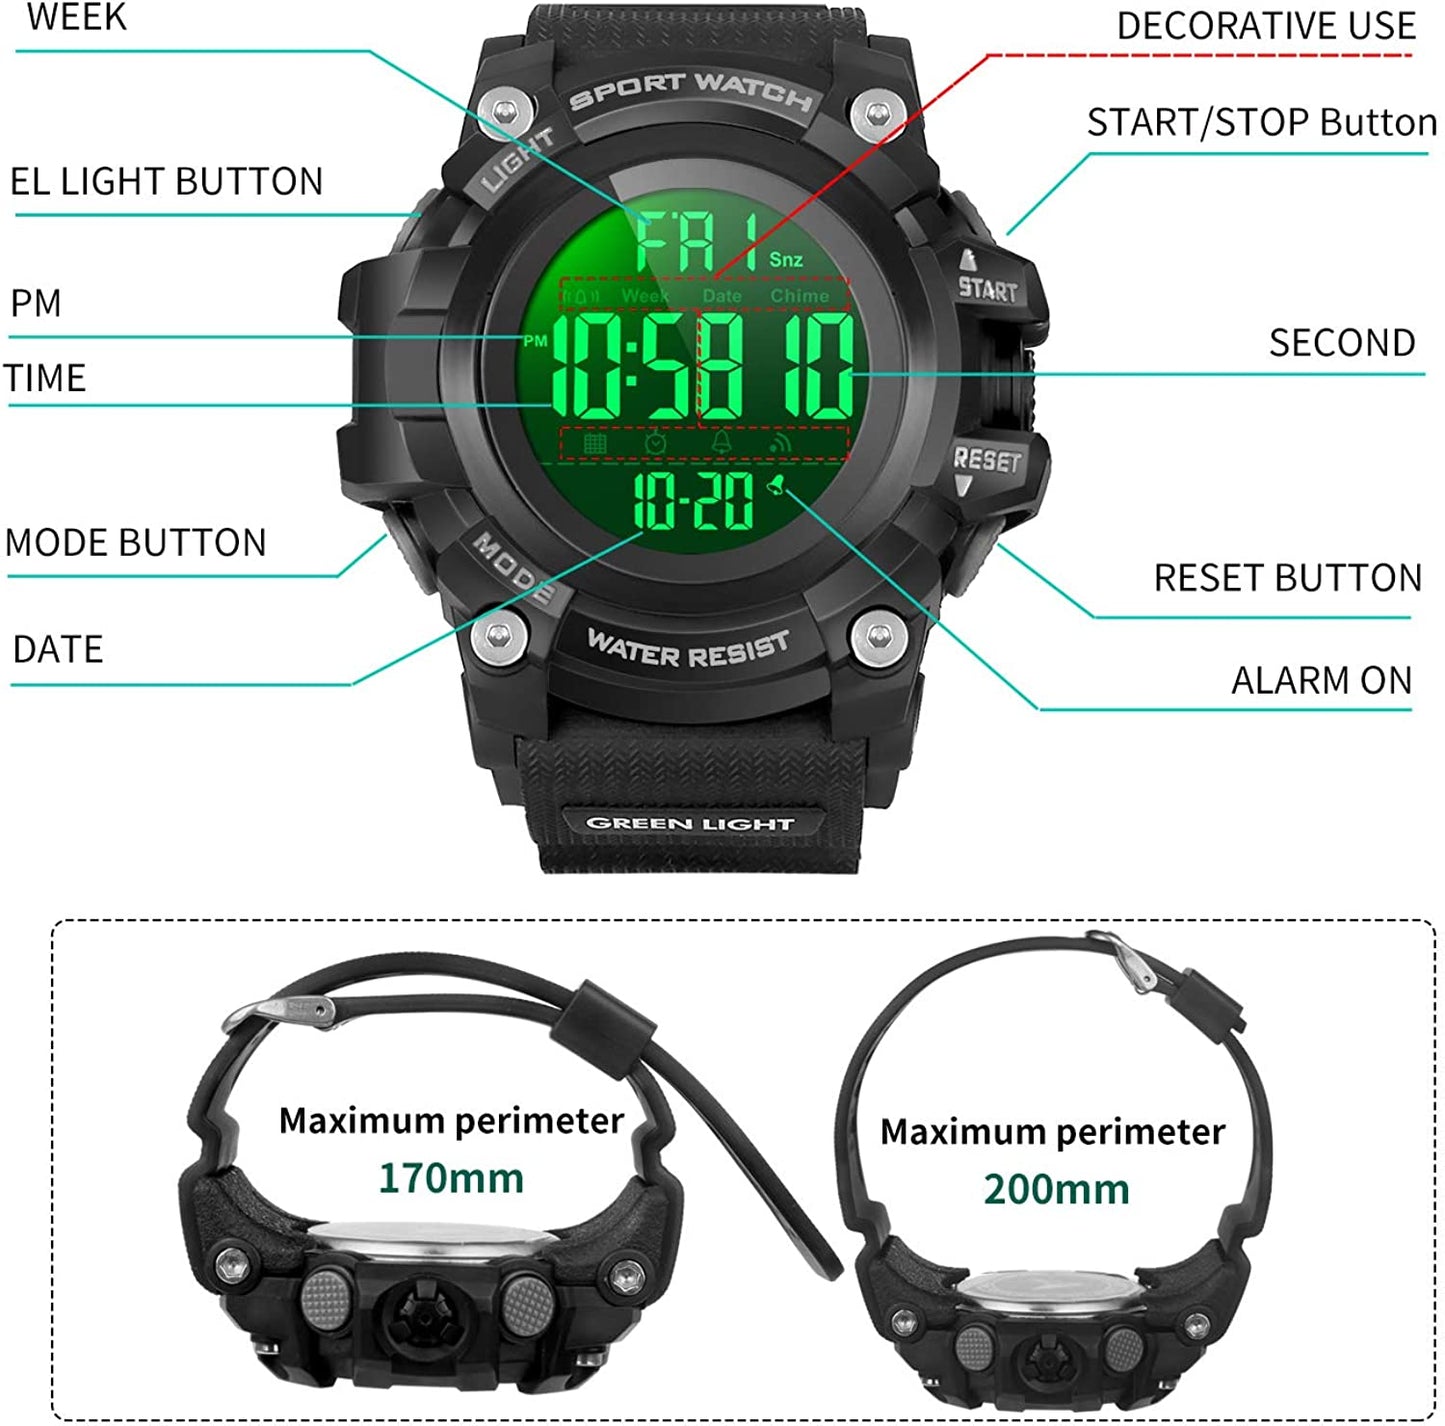 Men’s Digital Sport Watch, Military Watches with 50M Waterproof Stopwatch Army Alarm Chime Hourly Count down Calendar Date Dual Time and Simple Luminous 12/24 